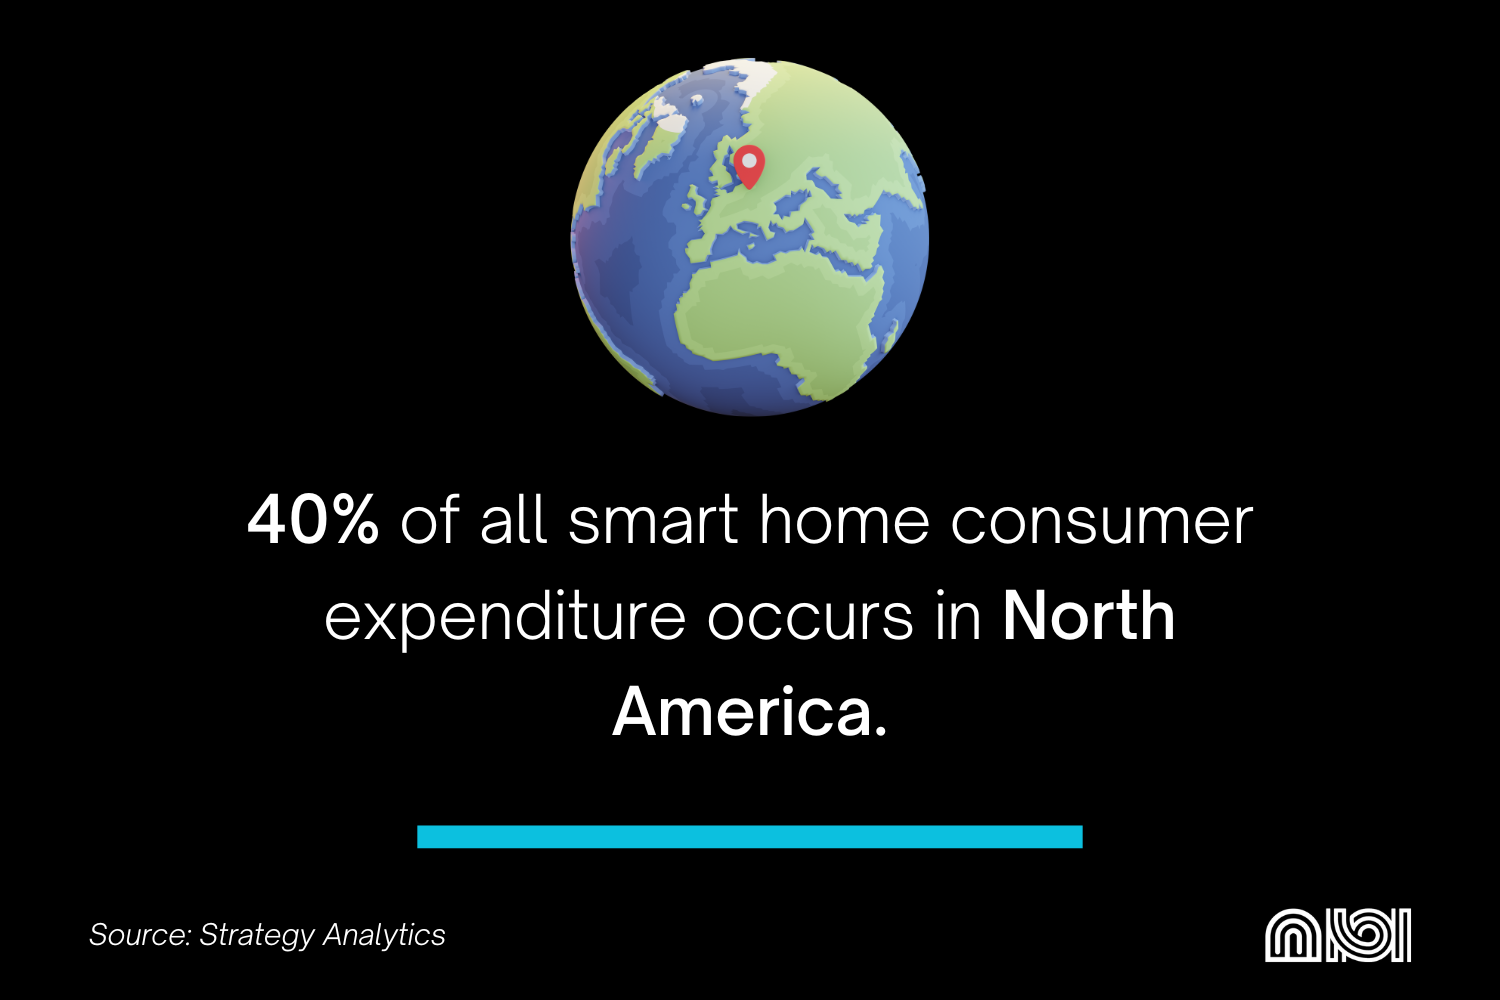 North America as the region responsible for 40% of global smart home spending.